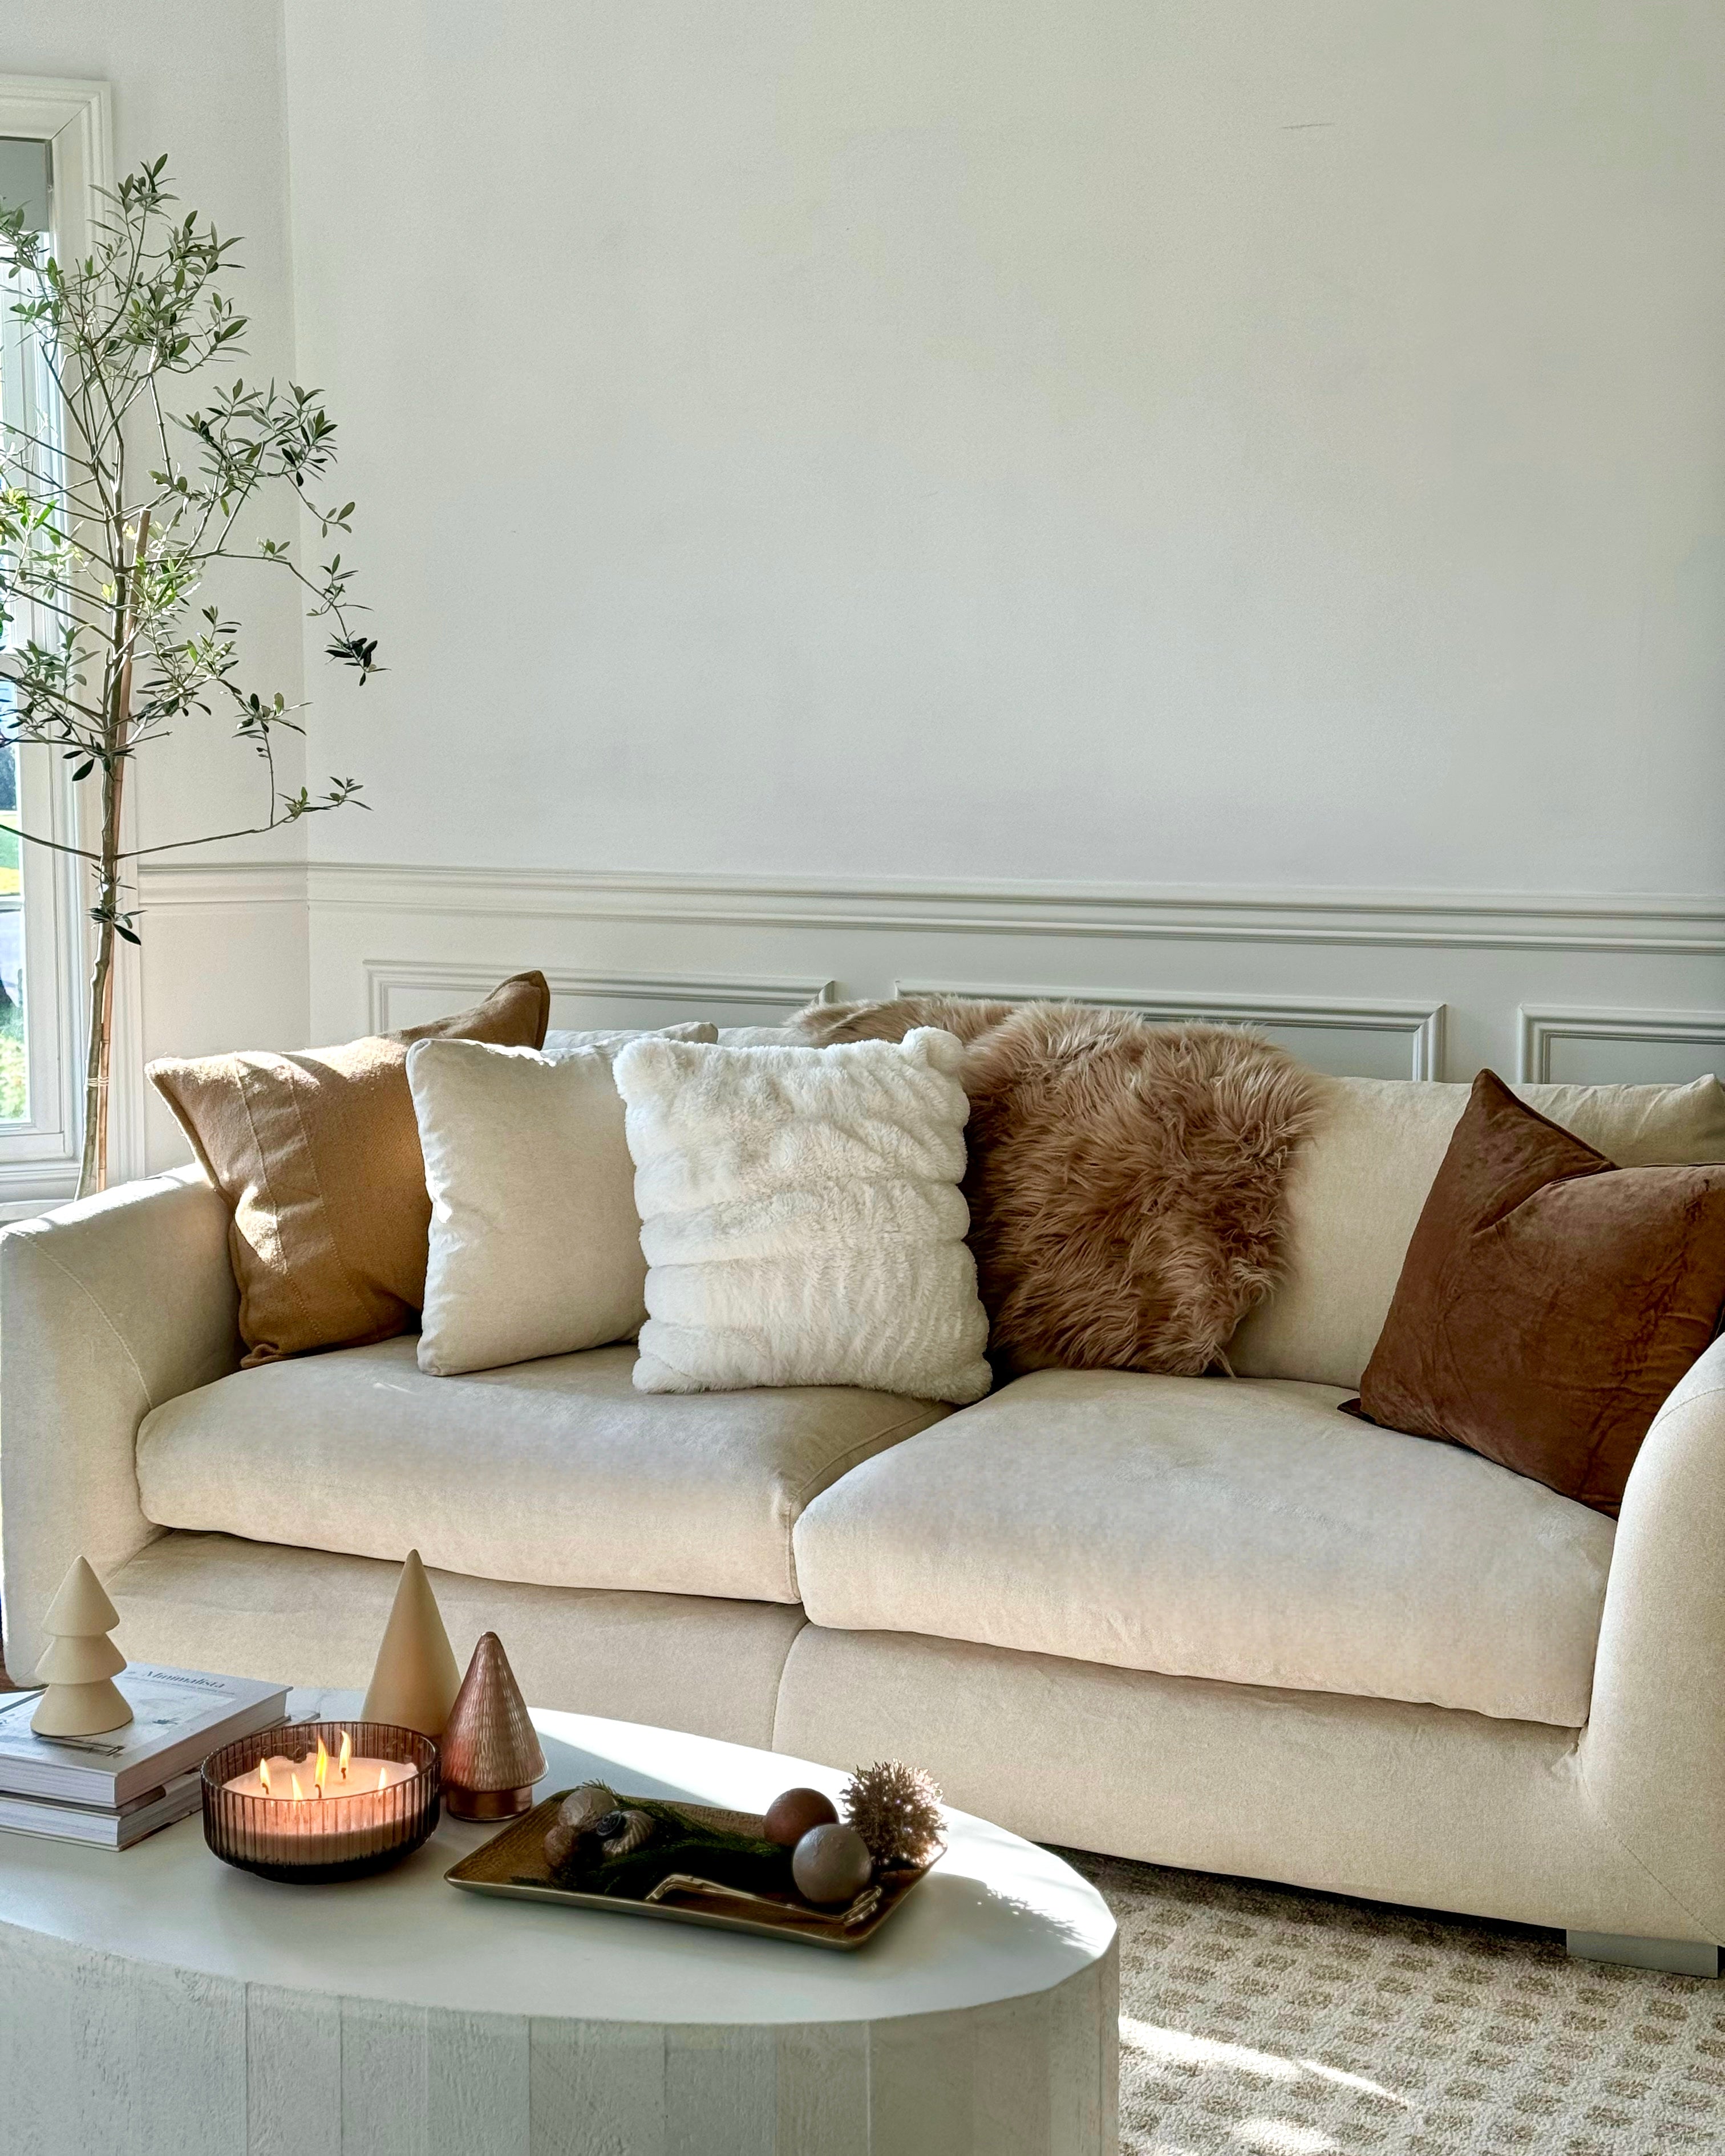 Beige Feathers Sofas: Sofas That Will Never Go Out of Fashion